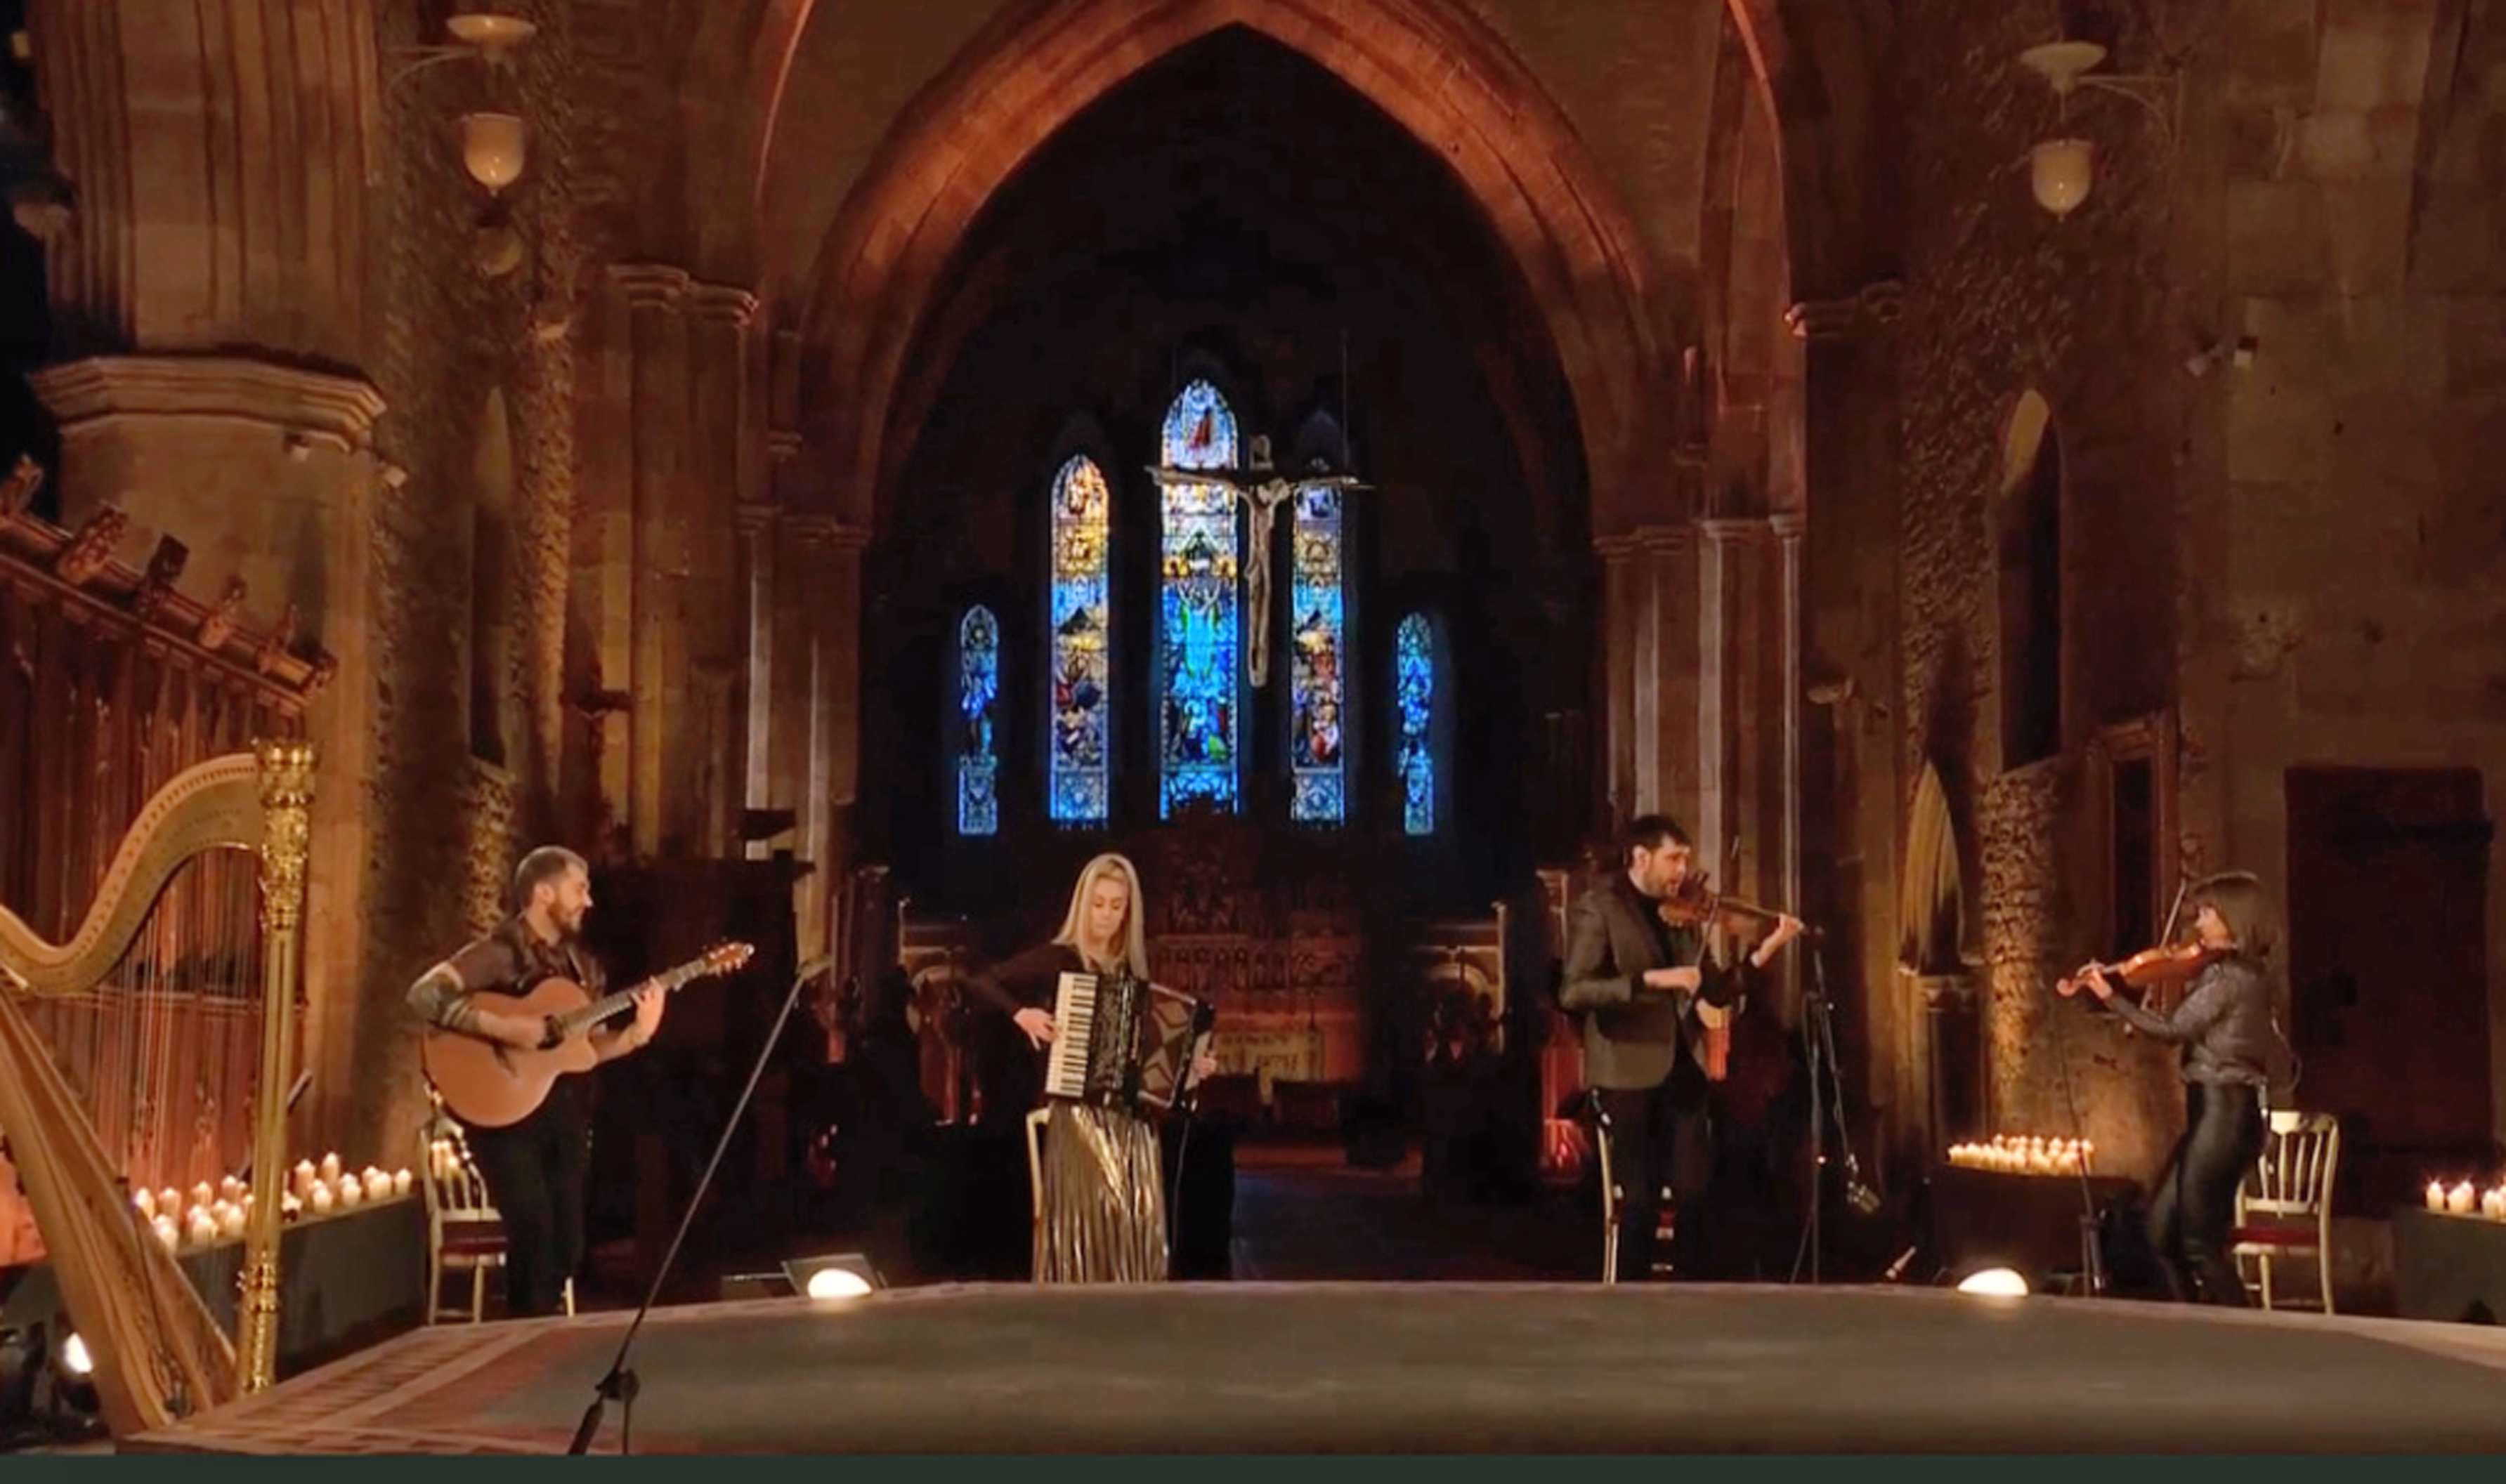 Calan playing at Brecon Cathedral for the Metropolitan Opera